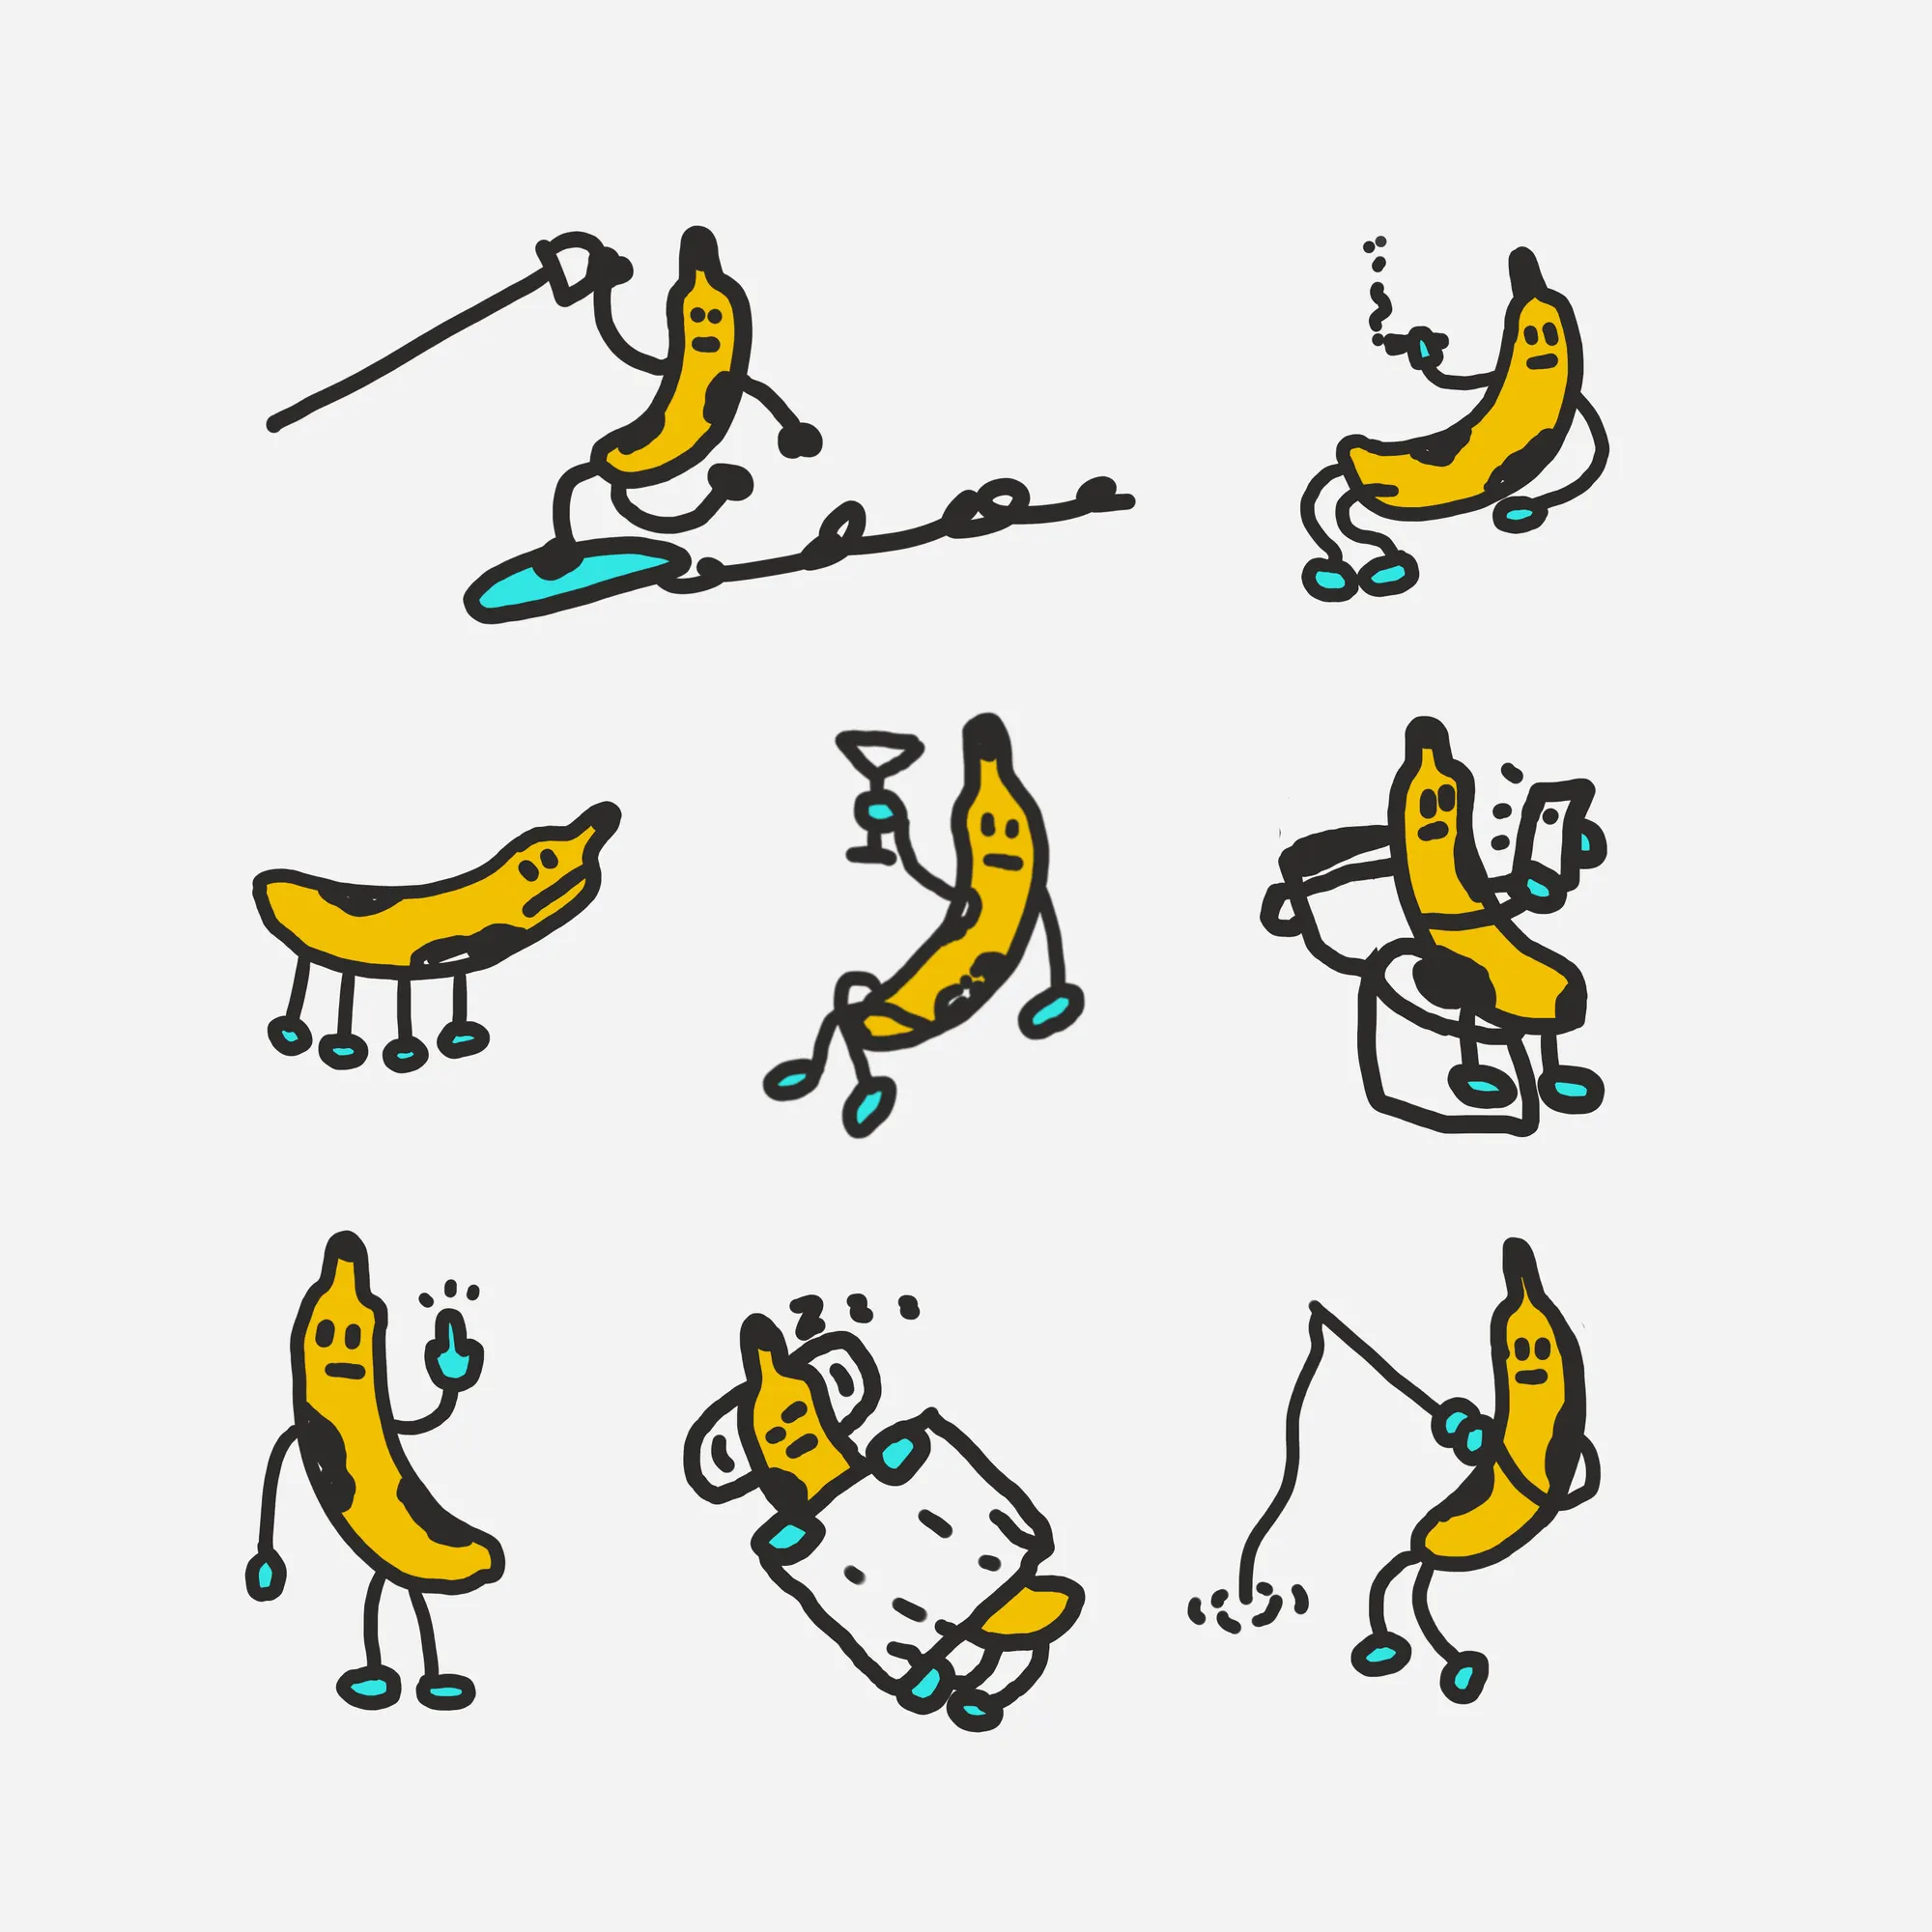 Eight illustrations of bananas personified. Clockwise from top left: 1. waterskiing 2. reclined and smoking 3. on all fours looking skyward 4. reclined and drinking a martini 5. seated looking at a phone 6. standing with an "idea" finger in the air 7. sleeping 8. fishing.